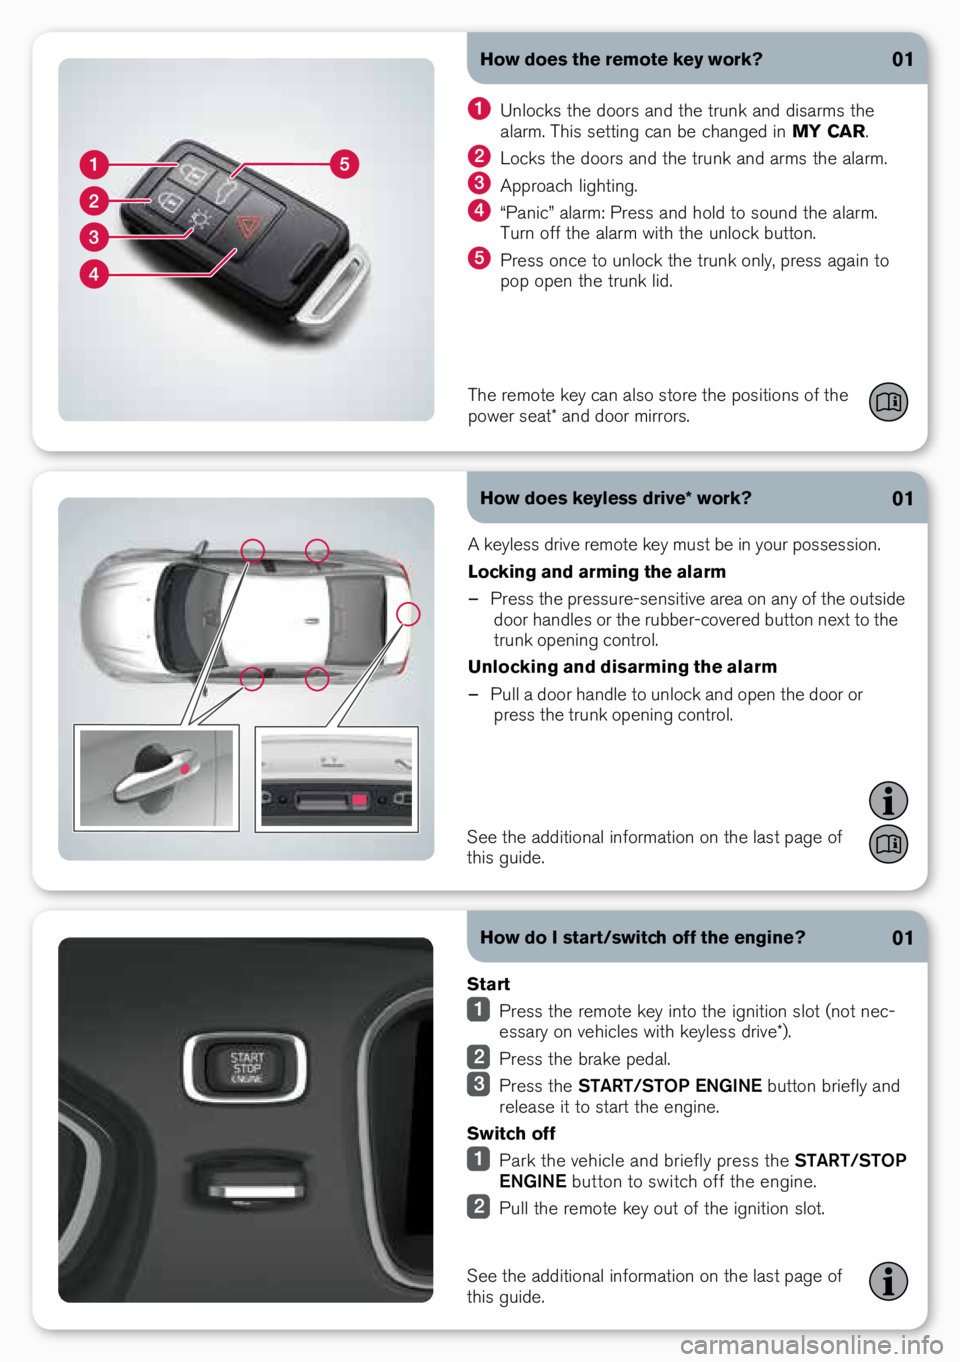 VOLVO S60 INSCRIPTION 2016  Quick Guide How does the remote key work?
How does keyless drive* work?01
01
A keyle\f\f drive rem\bte key mu\ft be in y\bur p\b\f\fe\f\fi\bn.
Locking and arming the alarm 
– Pre\f\f the pre\f\fure-\fen\fitive 